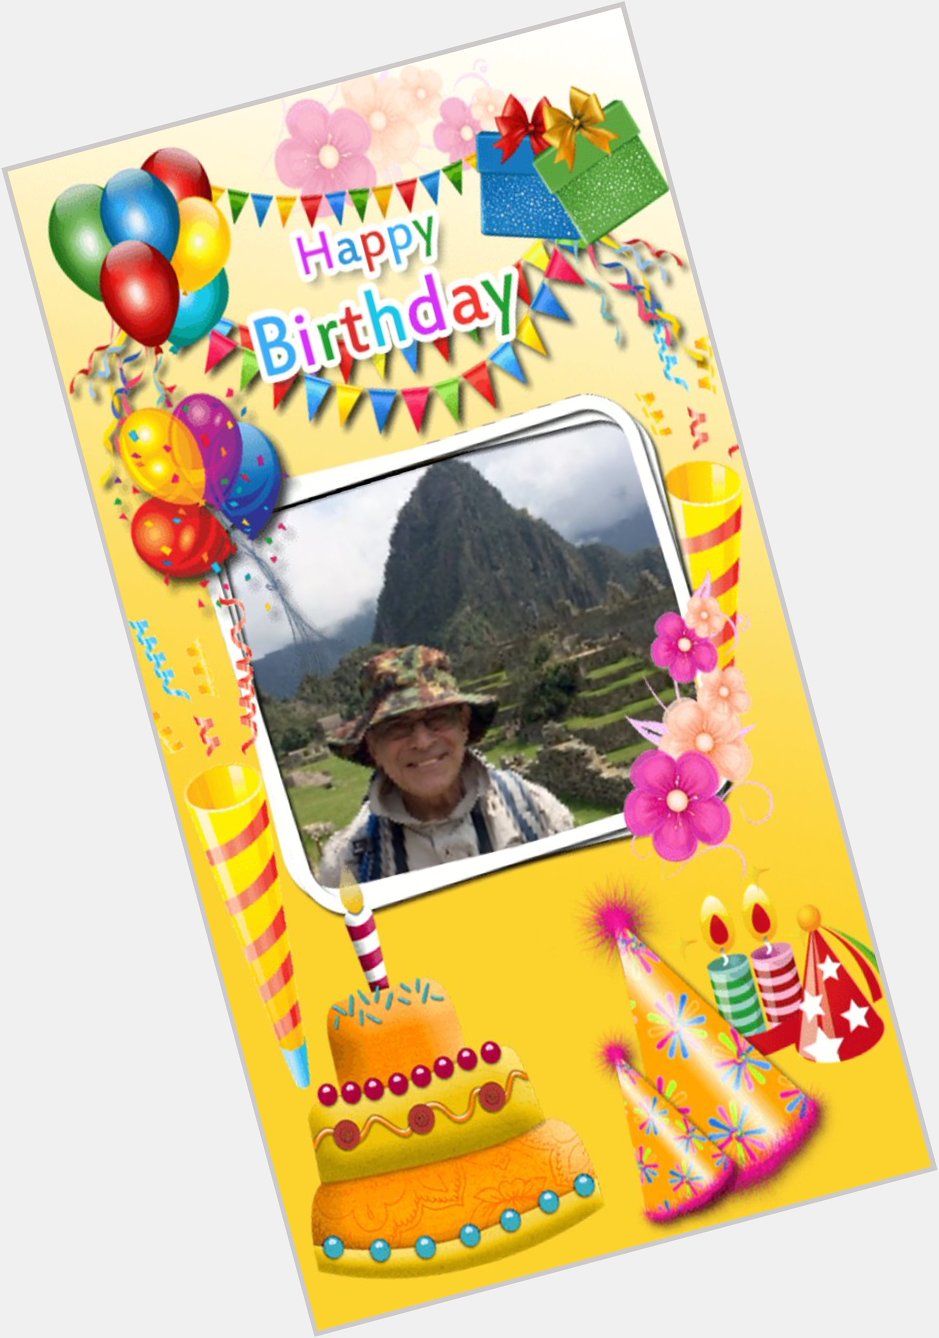  Happy Birthday all the way from Lima, Perú! Tons of blessings! 